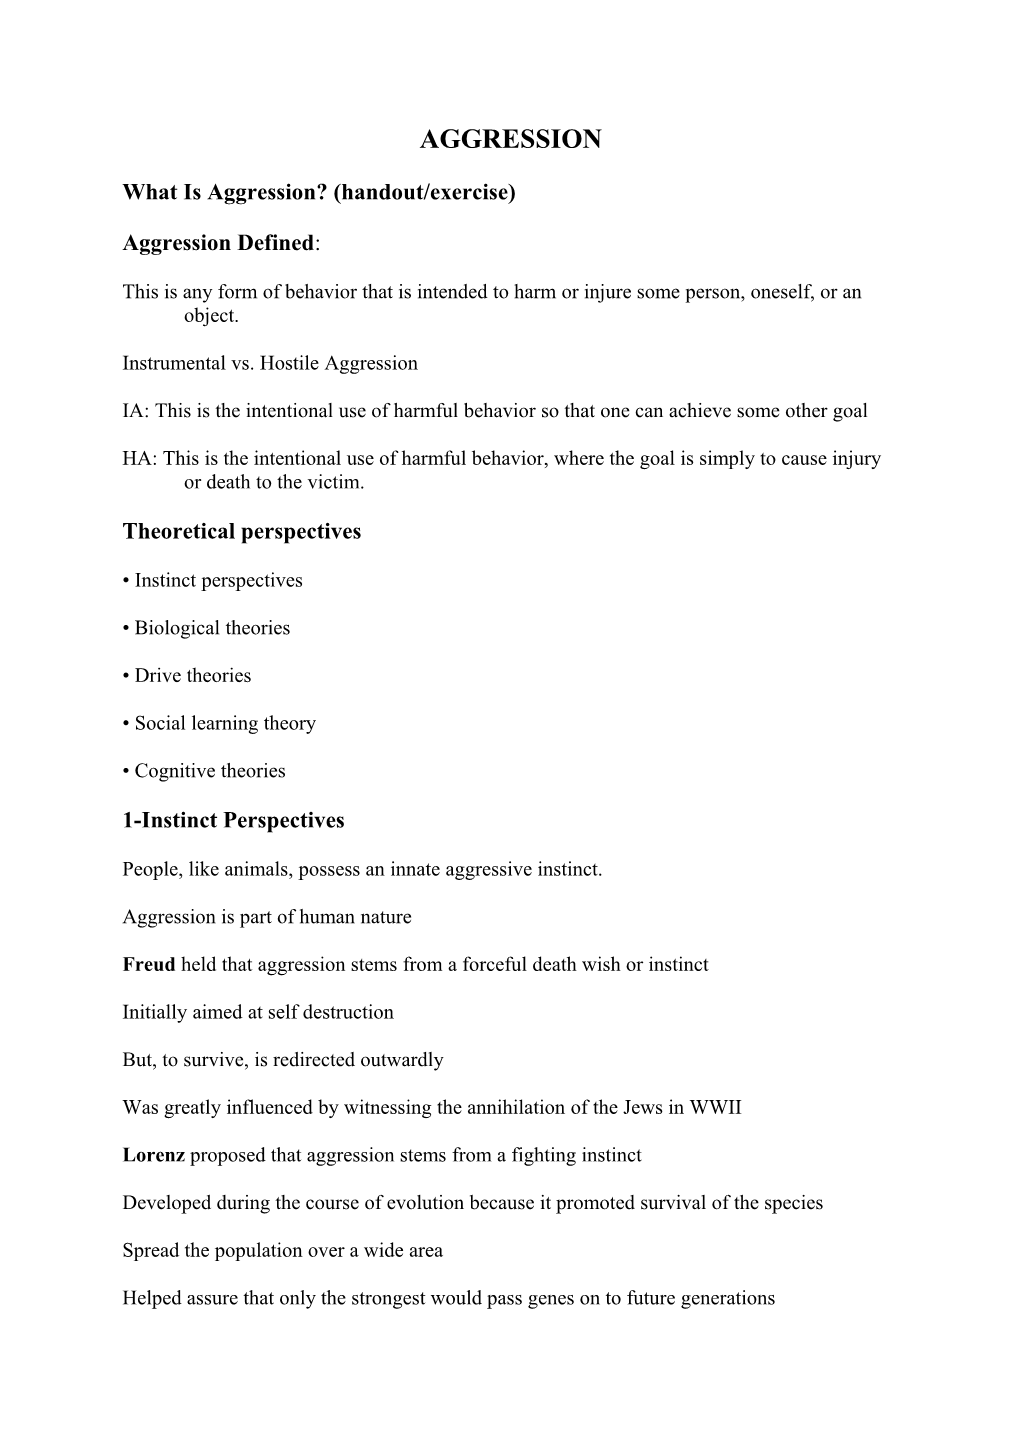 What Is Aggression? (Handout/Exercise)